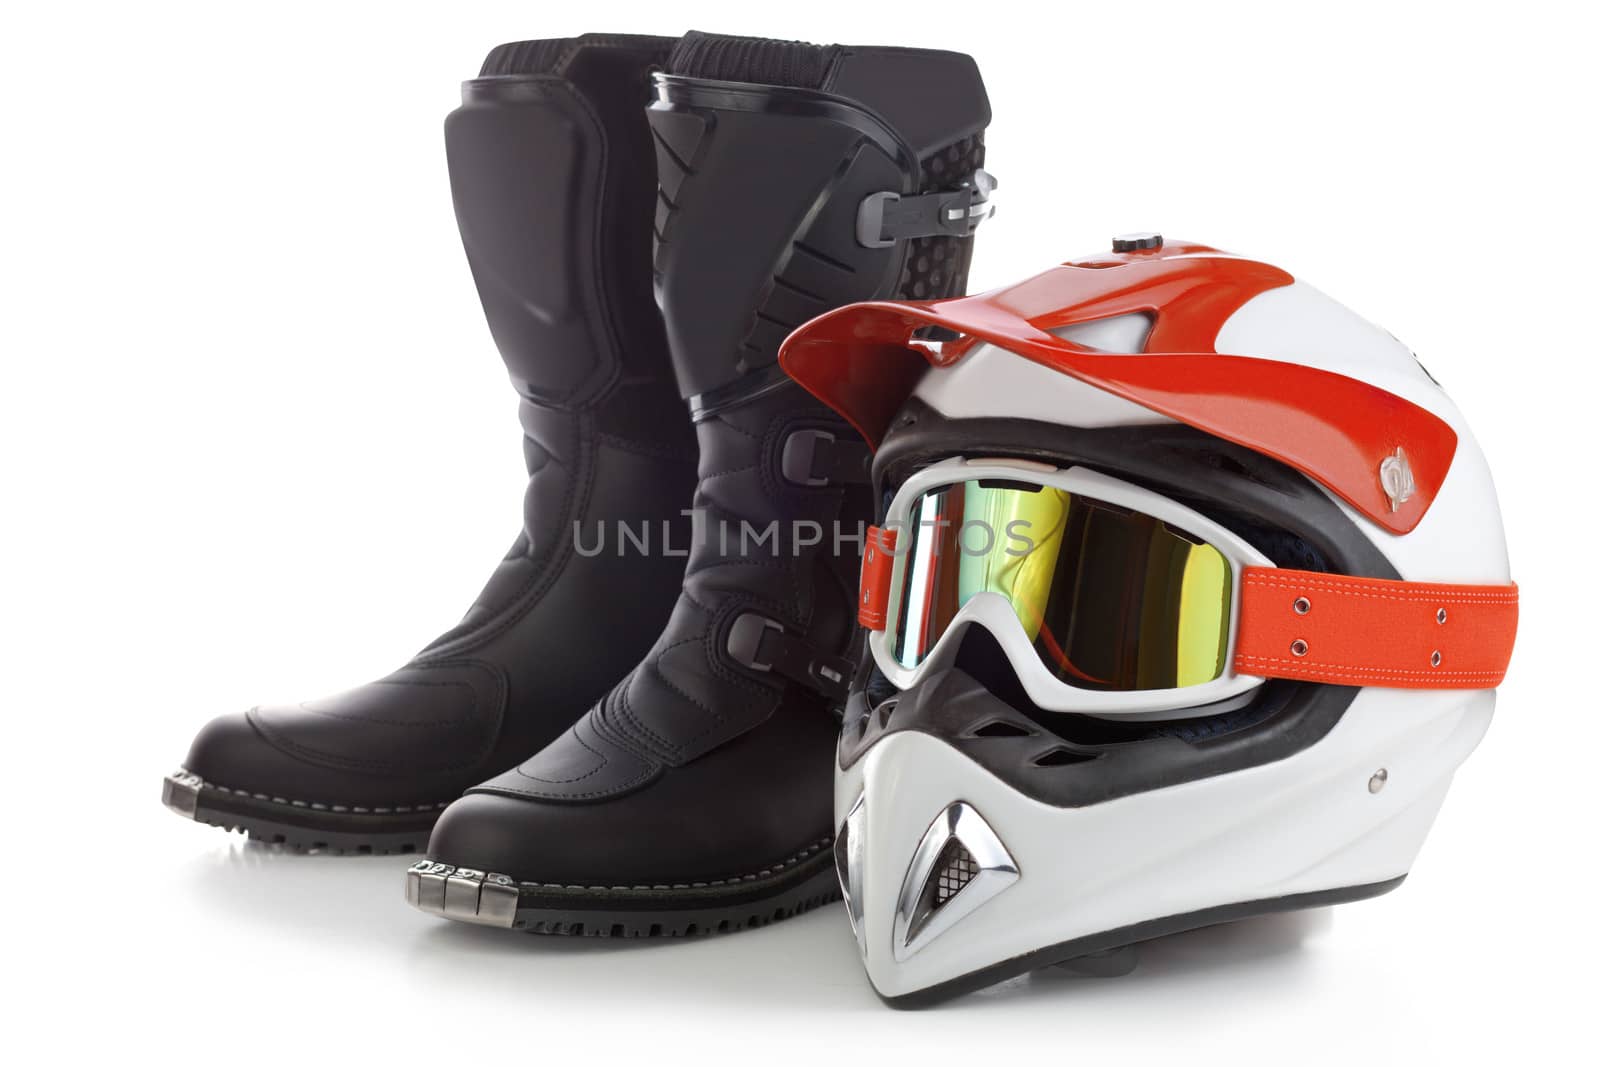 Motocross protection equipment by Kor